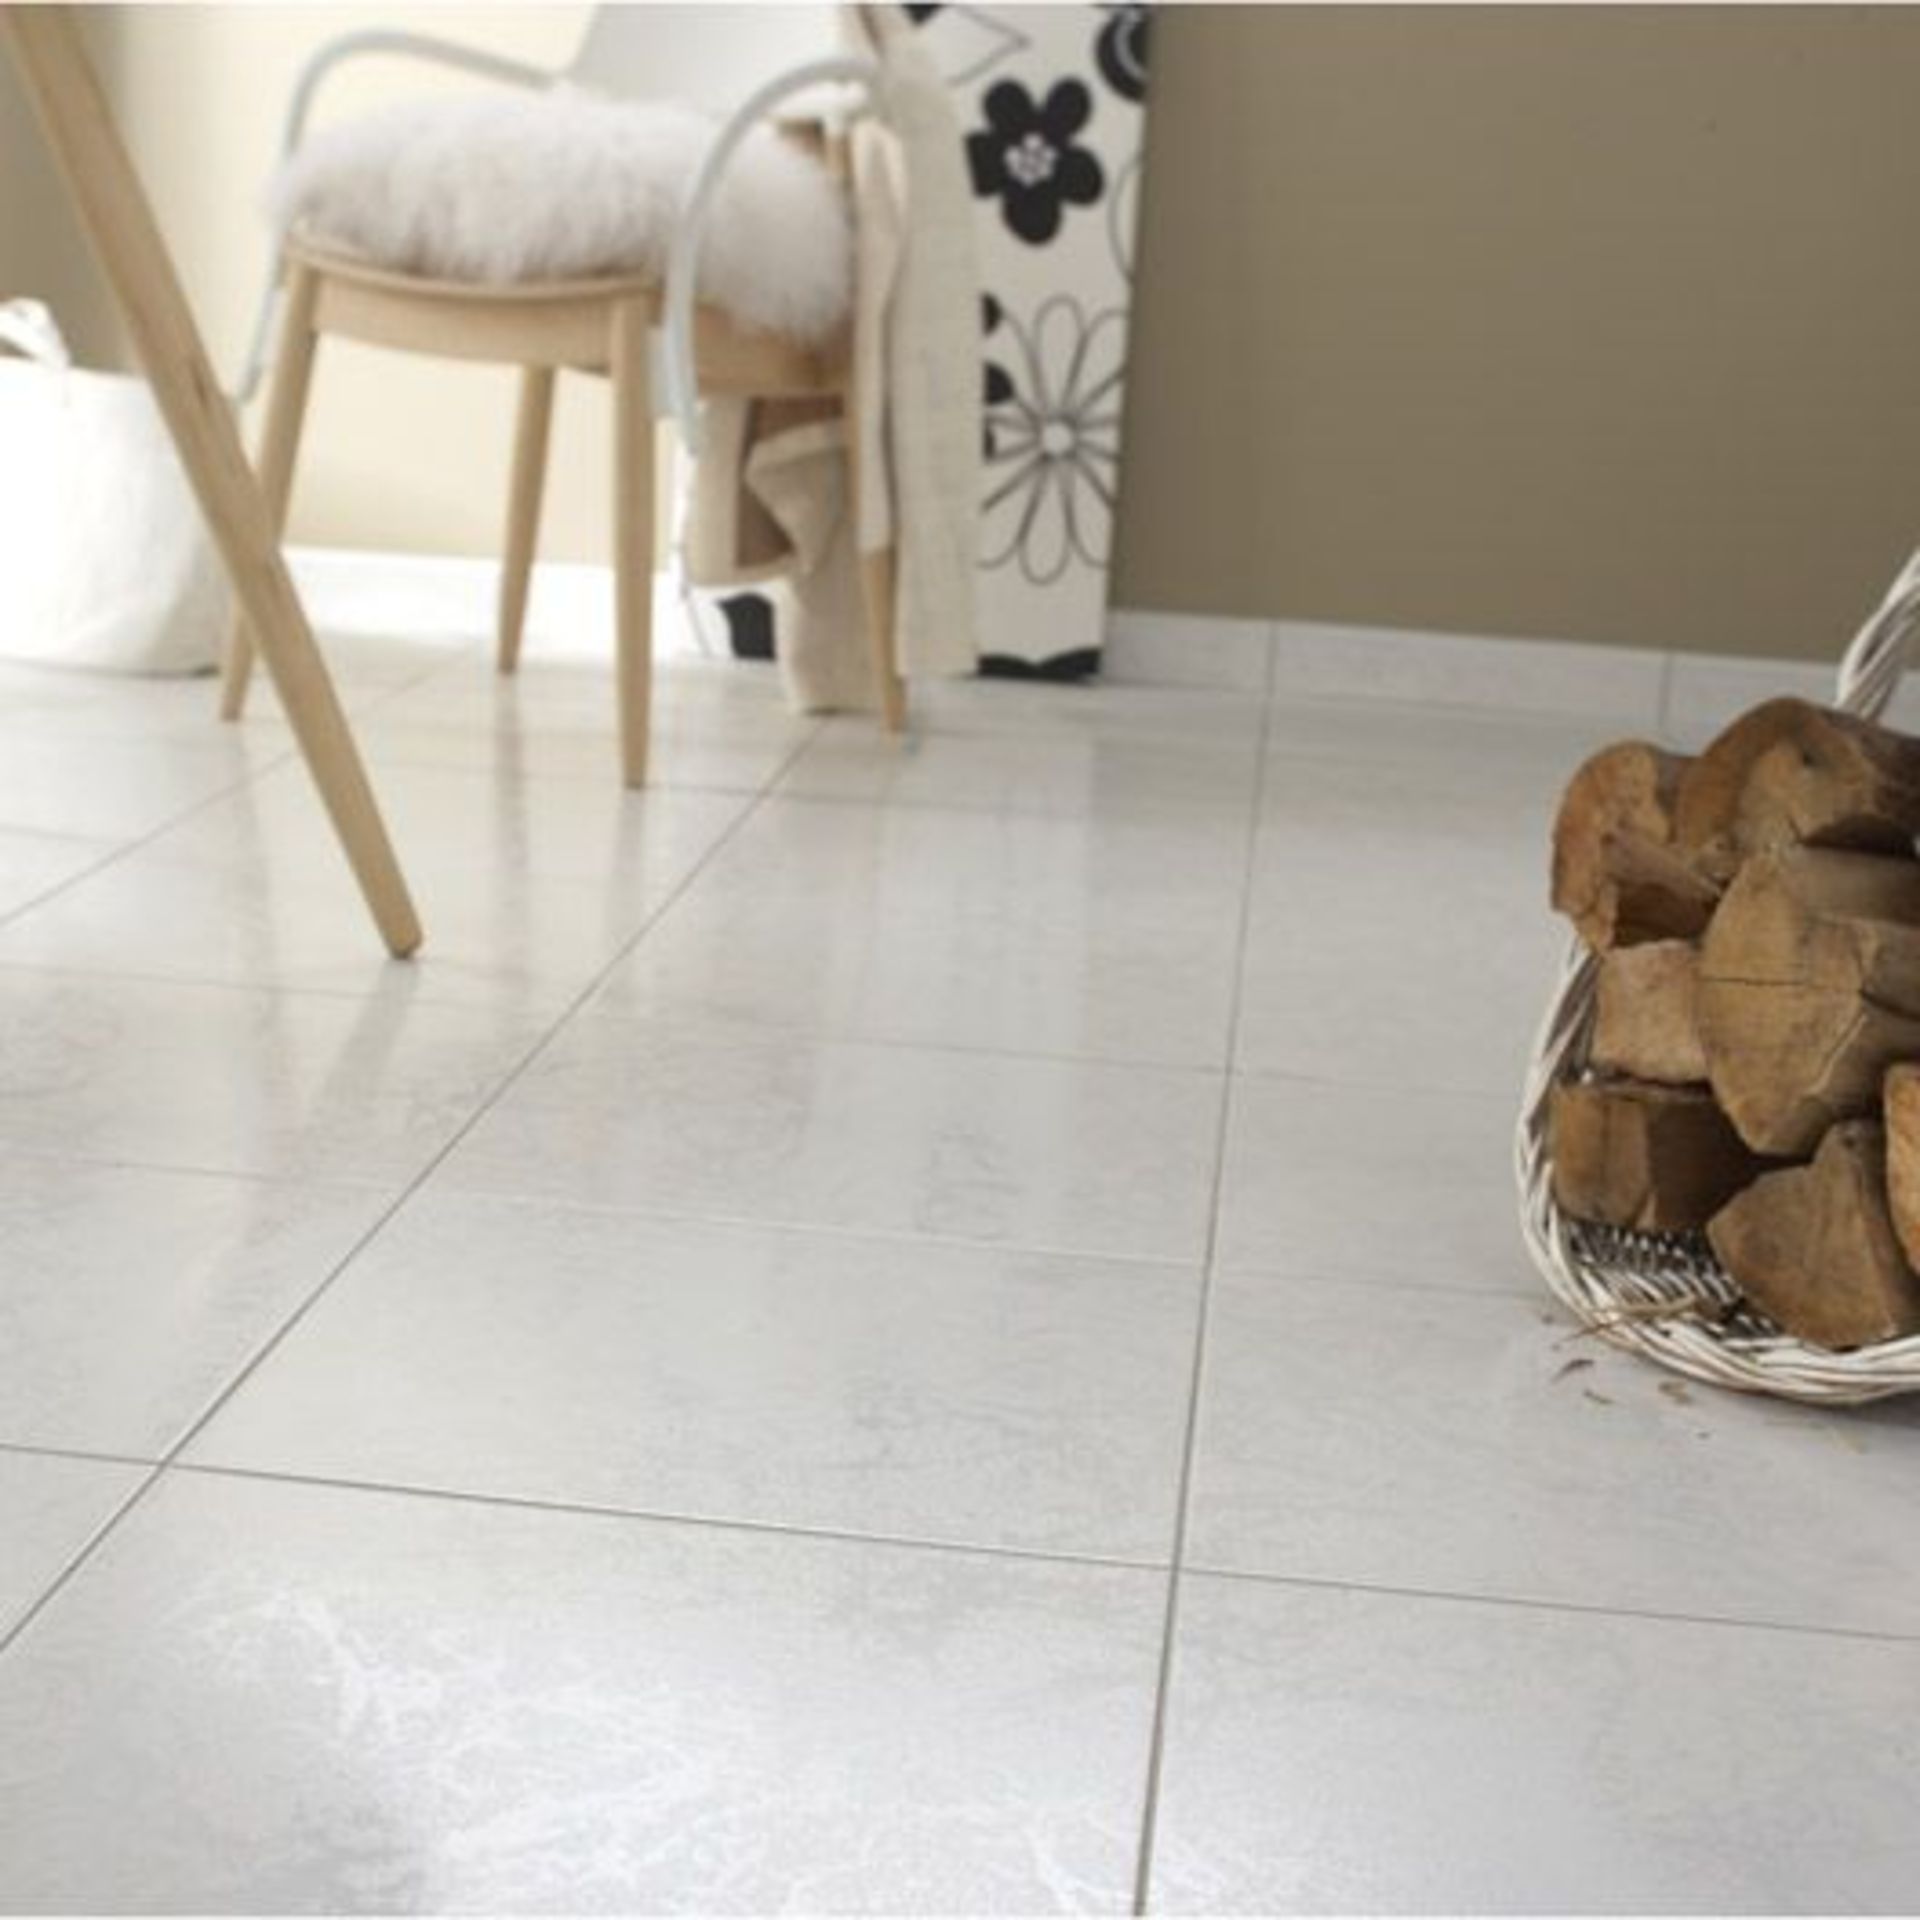 NEW 11.34m2 Ubeda Blanco Floor and Wall Tiles. 450x450mm per tile, 1.62m2 per pack. 8.7mm thick... - Image 3 of 3